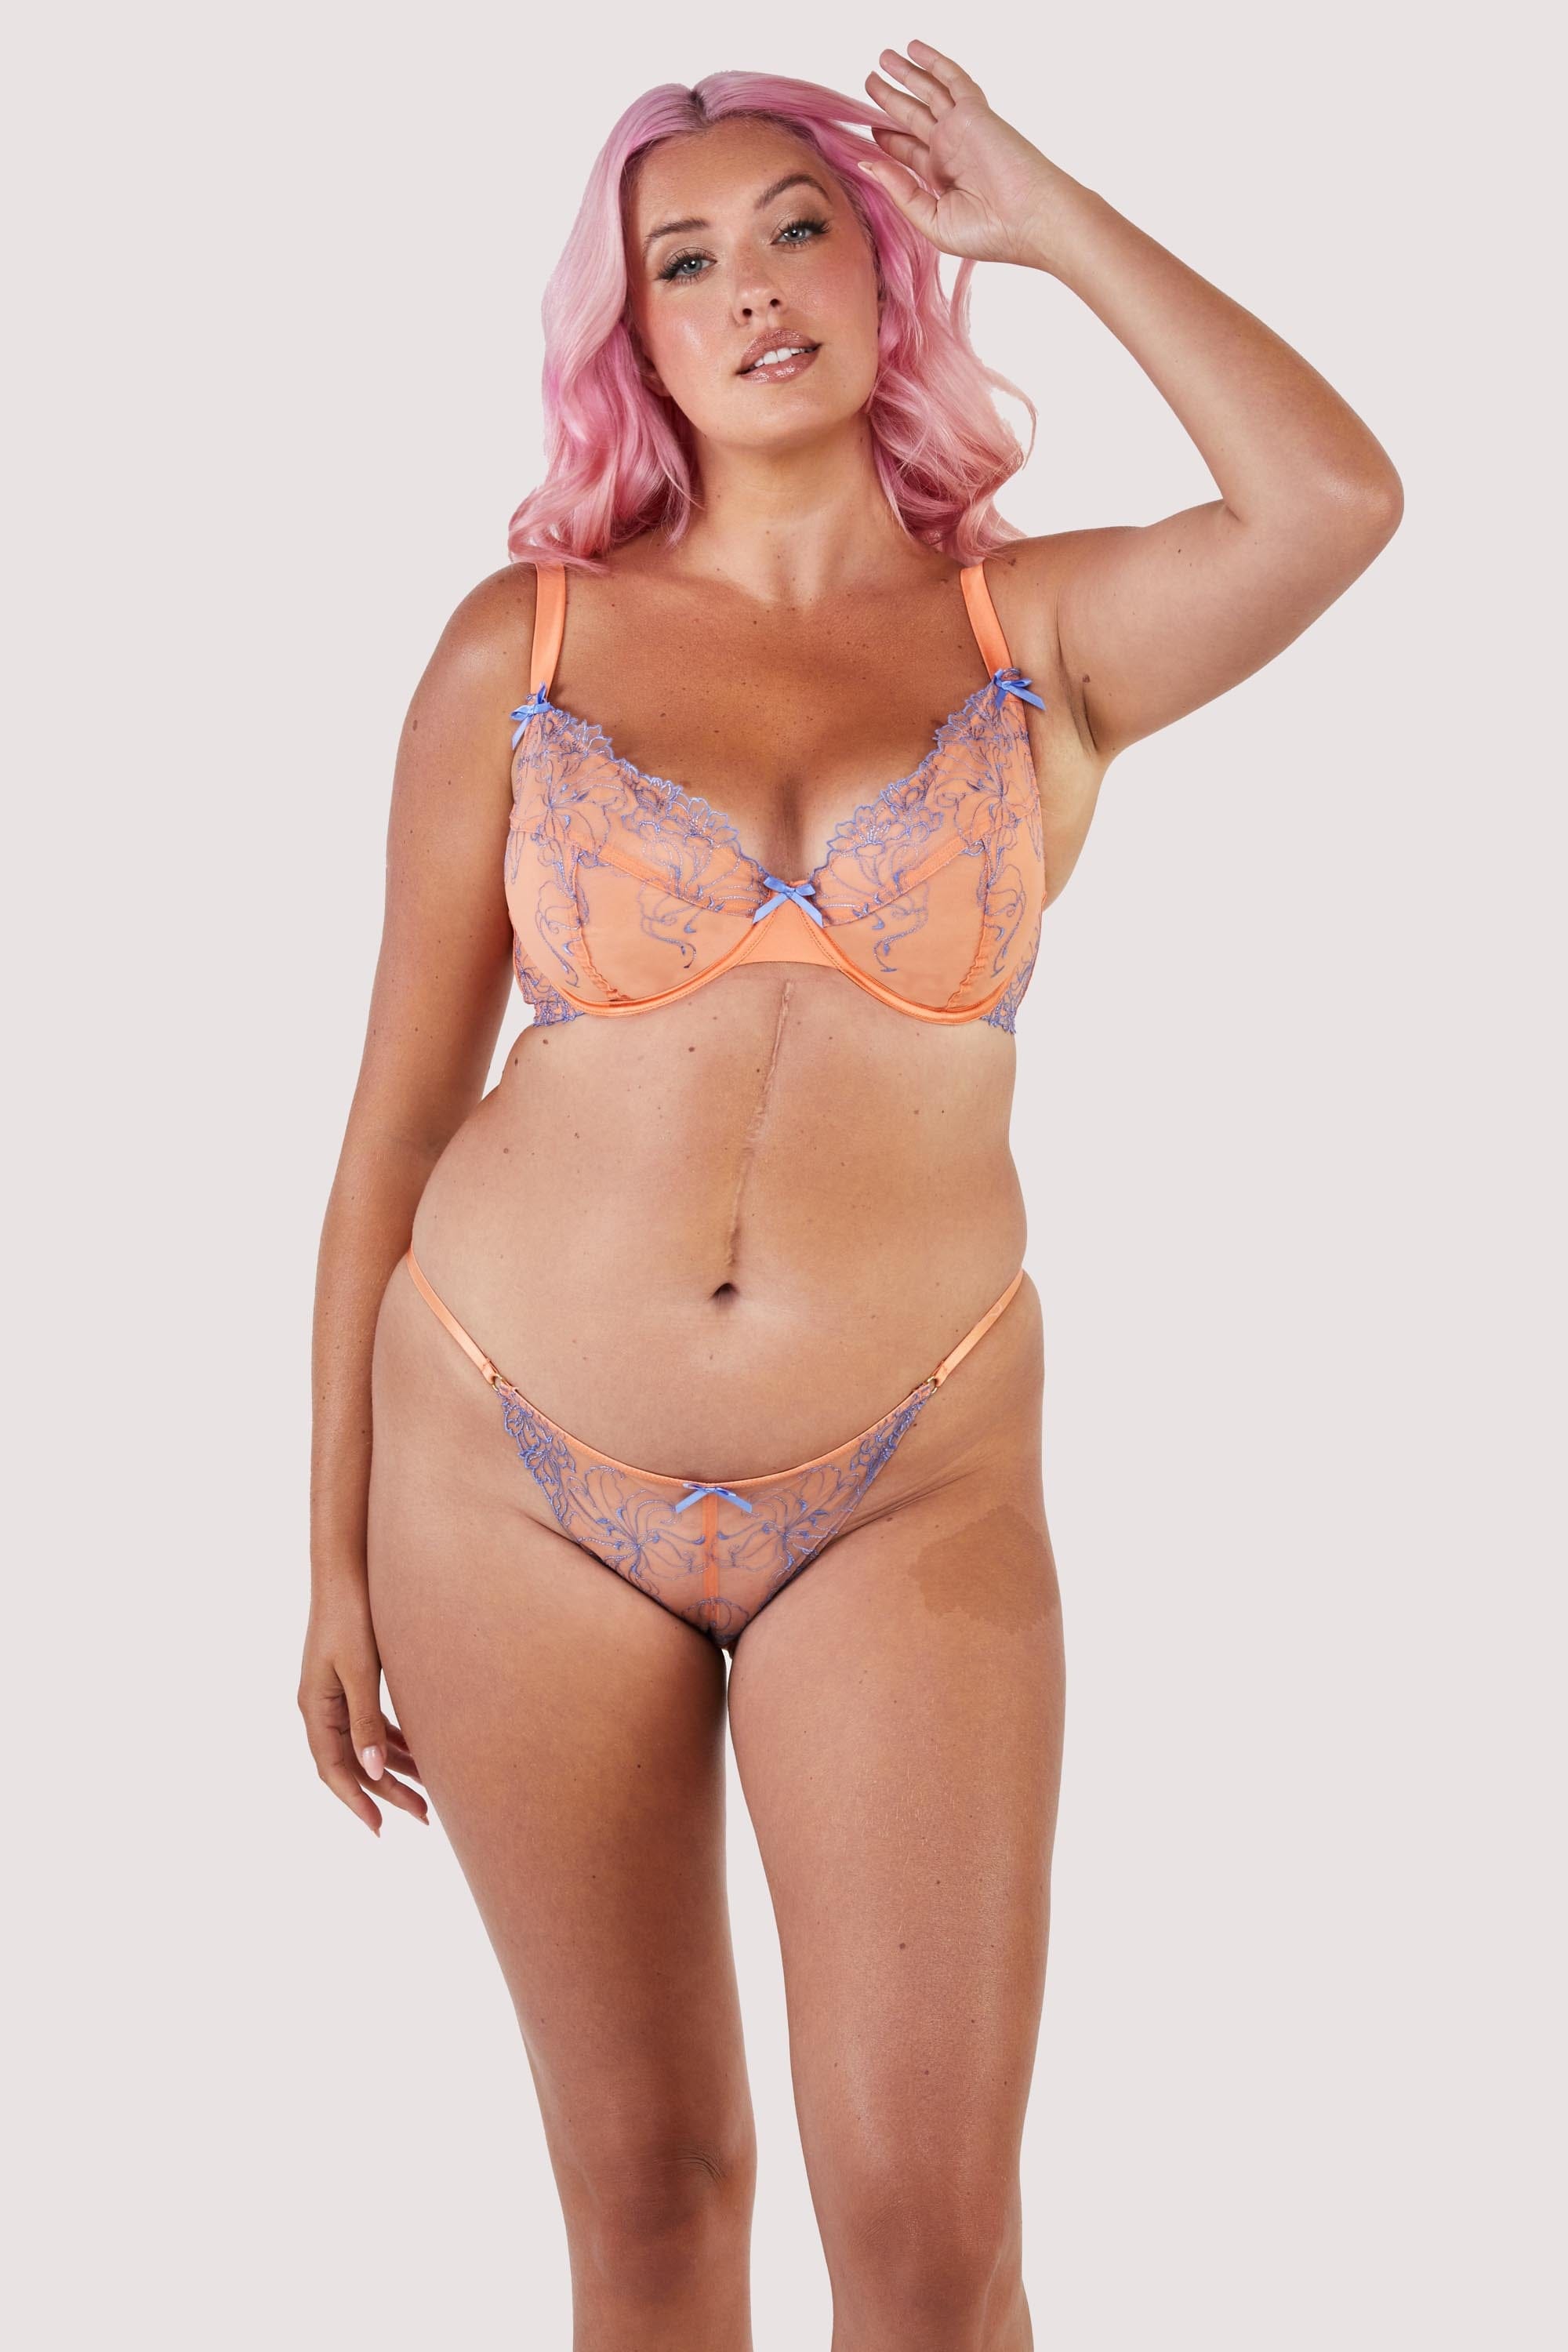 Mesh and lace orange bra and brief set with lilac/blue lace accents and bows.